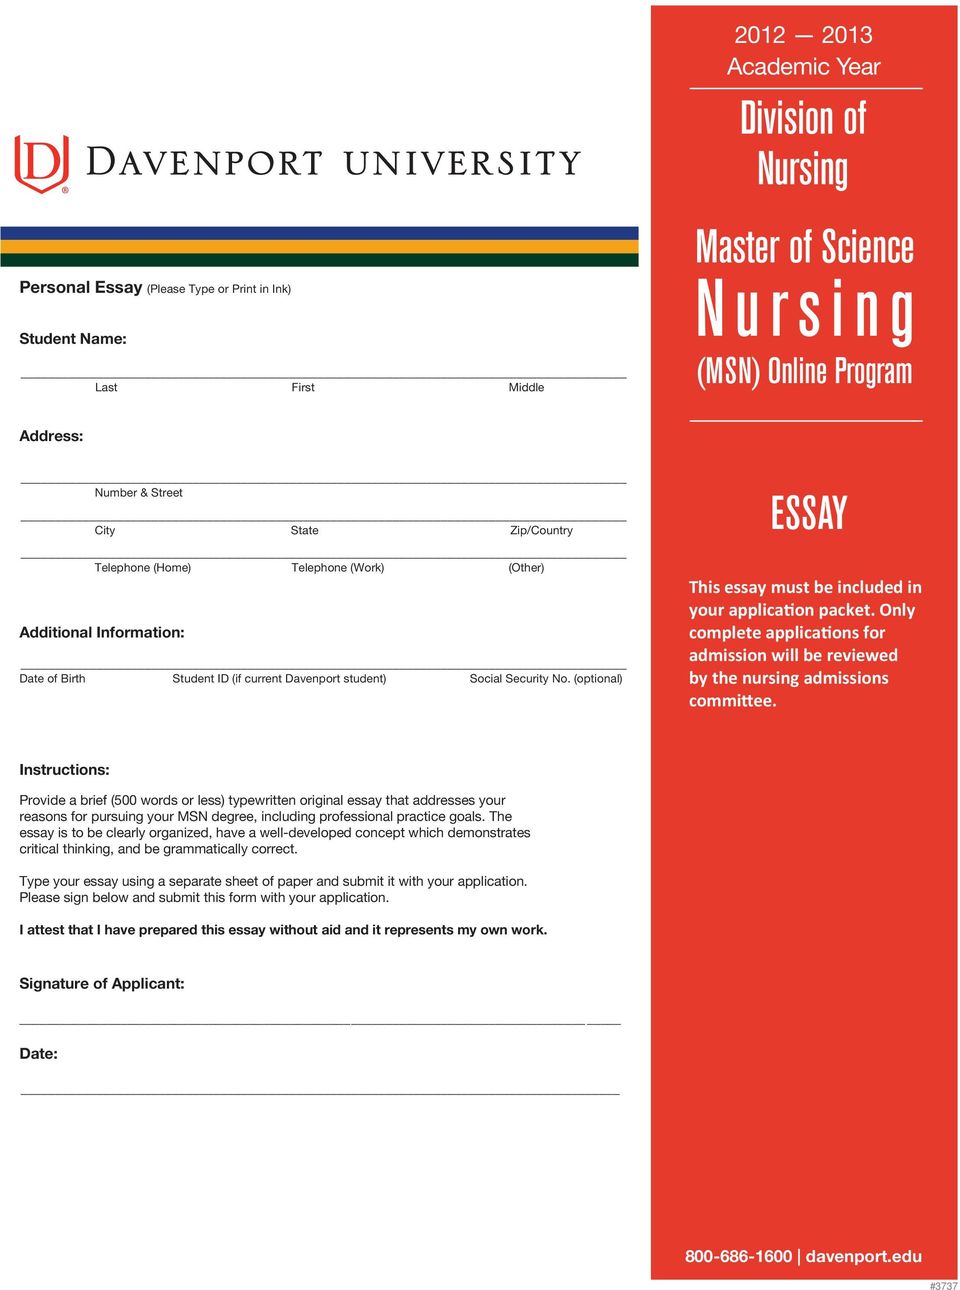 Instructions: Provide a brief (500 words or less) typewritten original essay that addresses your reasons for pursuing your MSN degree, including professional practice goals.